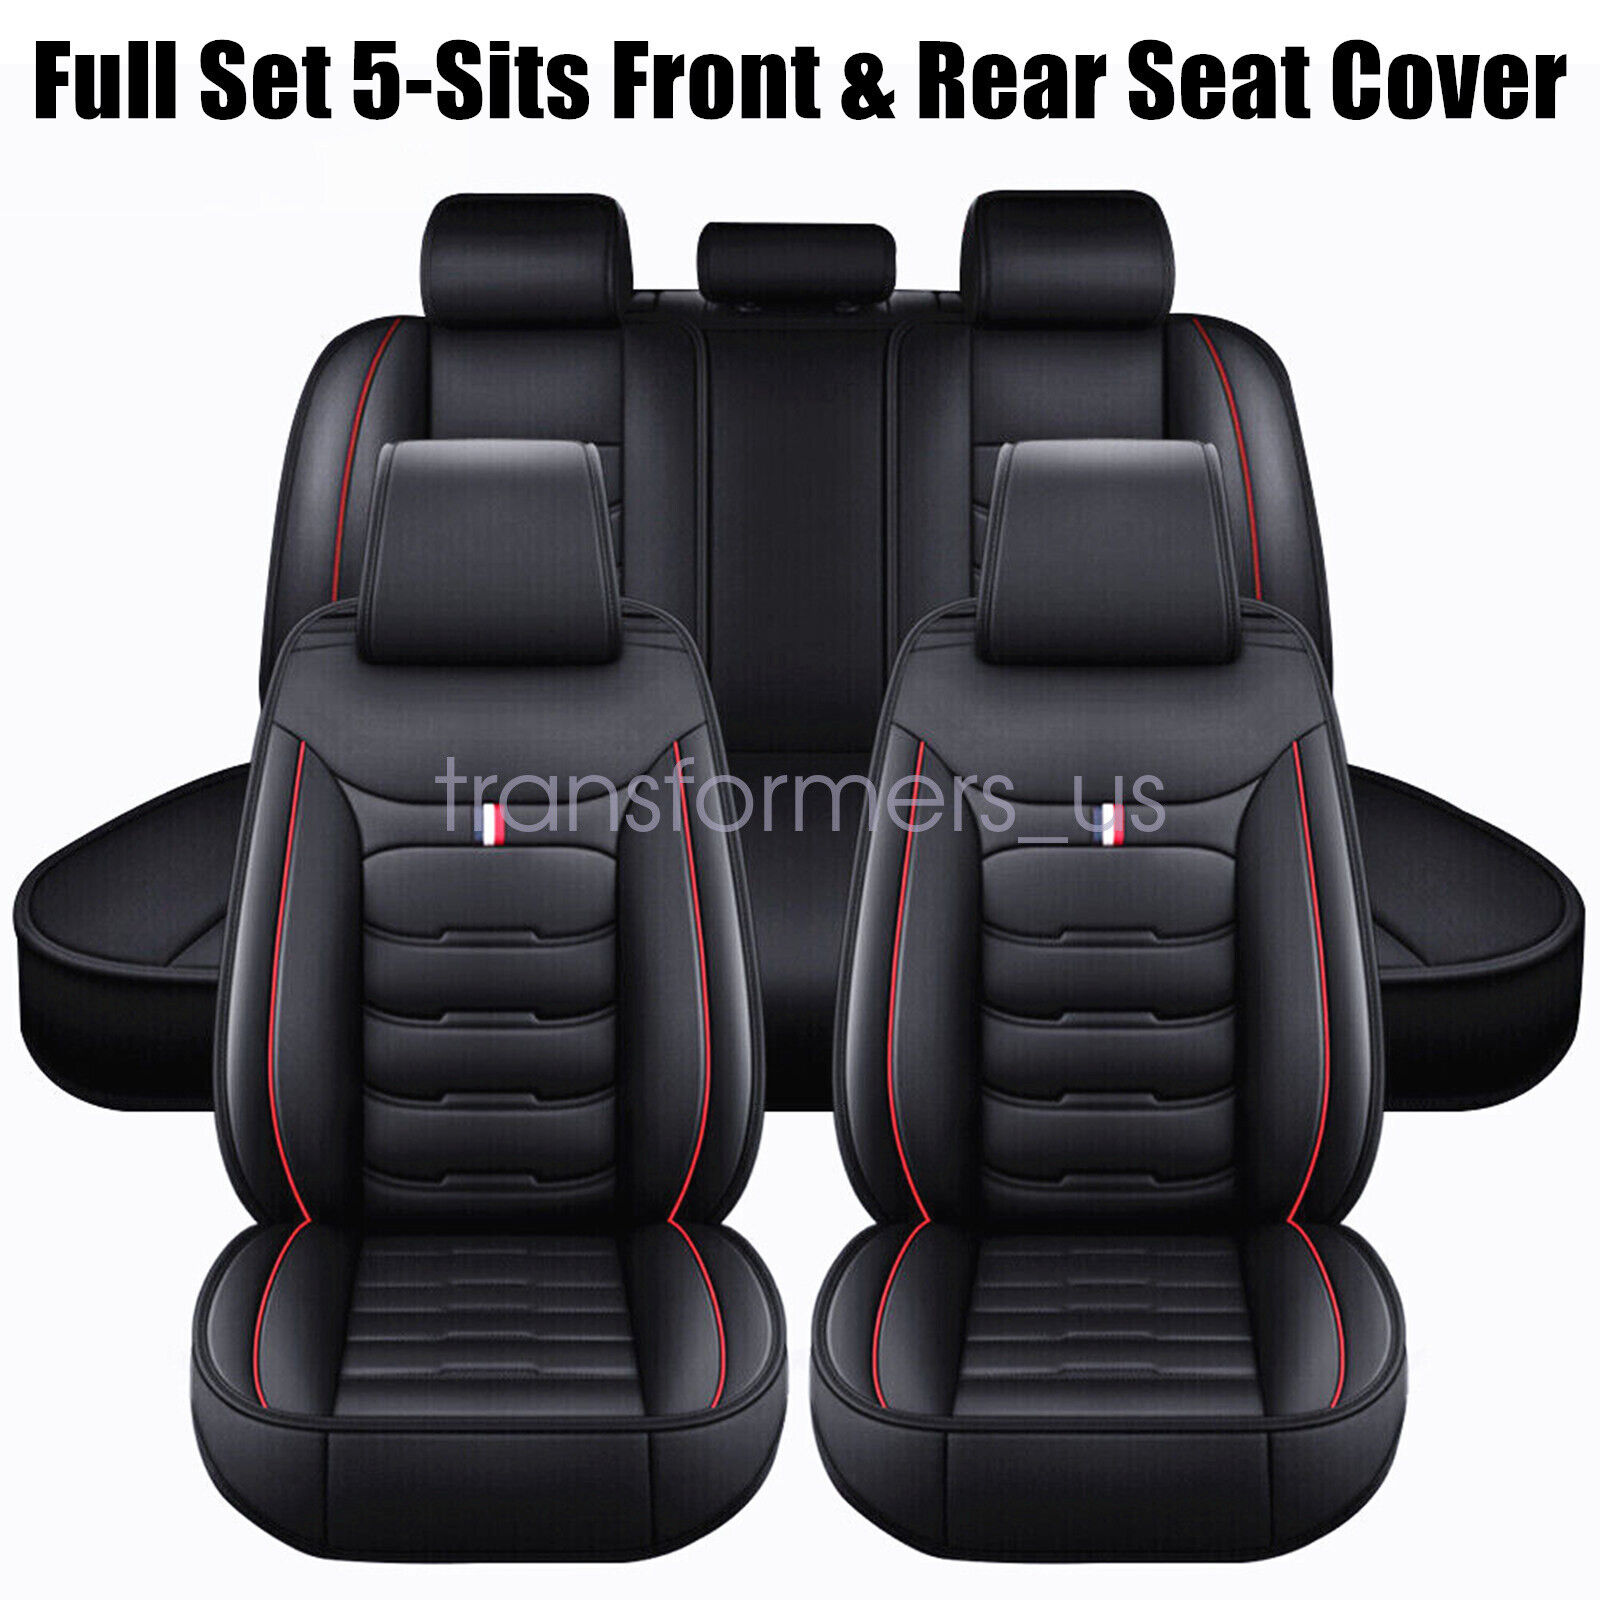 Car PU Seat Cover 5-Seat Full Set Deluxe Leather Front Rear Protector For Chevy